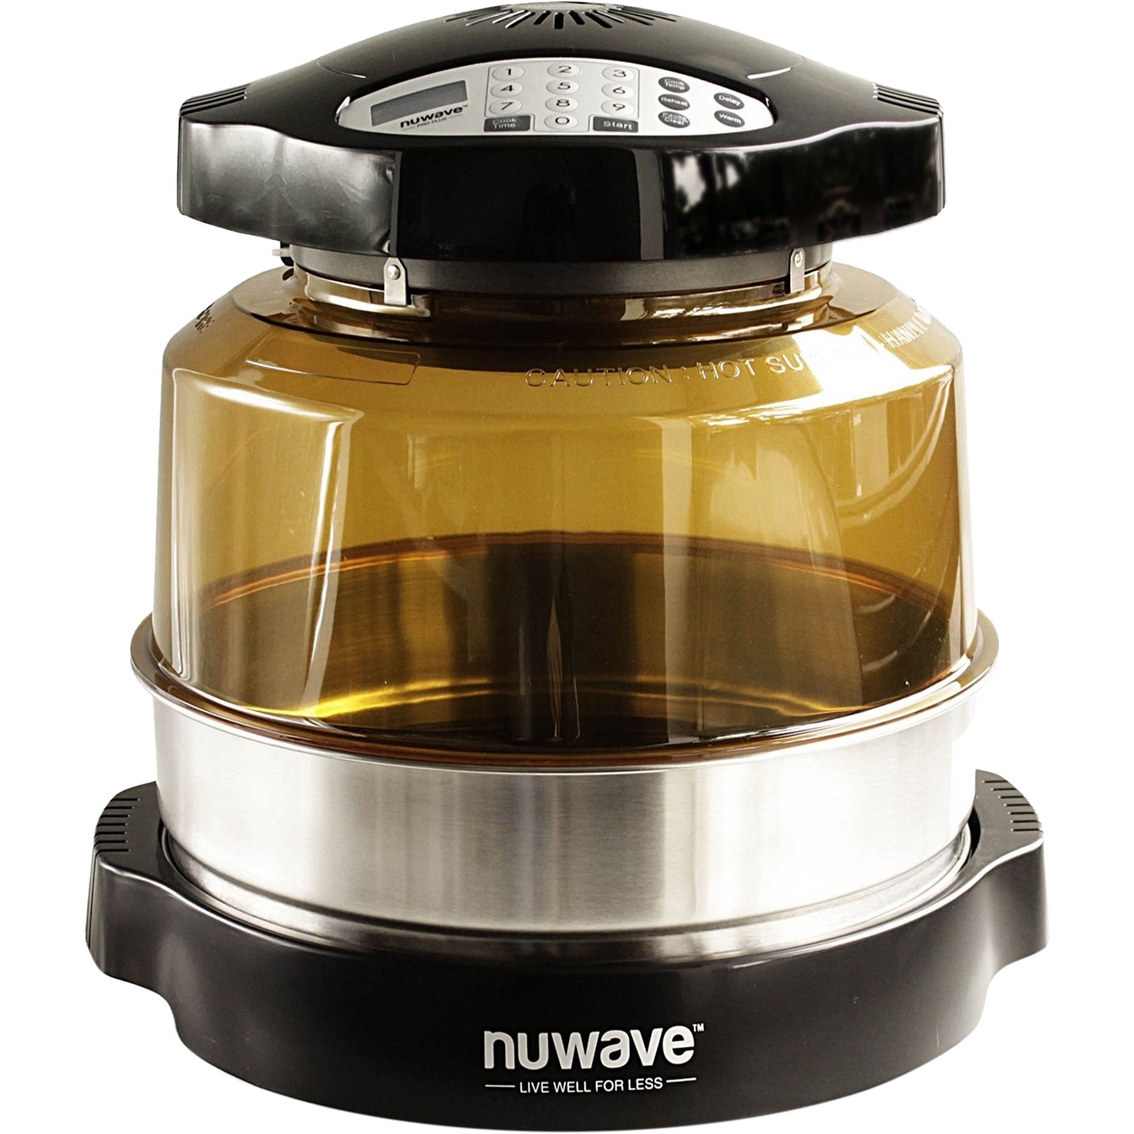 Nuwave Oven Pro Plus Cooking Chart